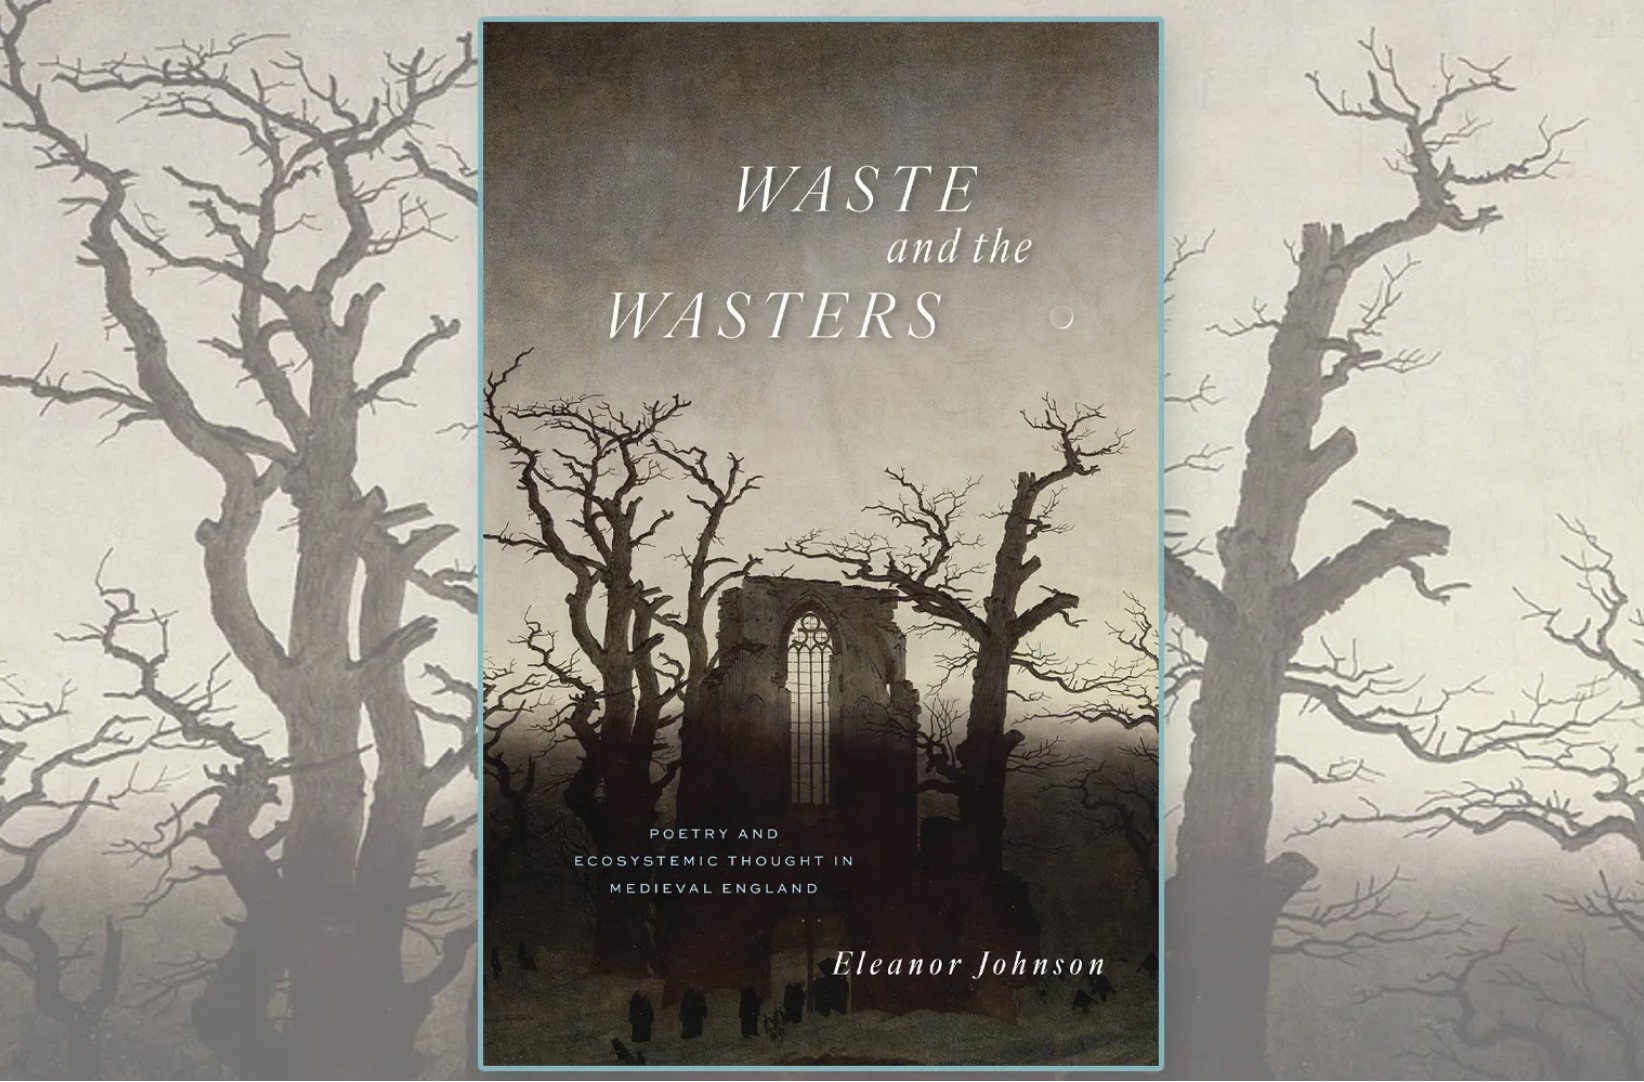 Waste and the Wasters: Poetry and Ecosystemic Thought in Medieval England